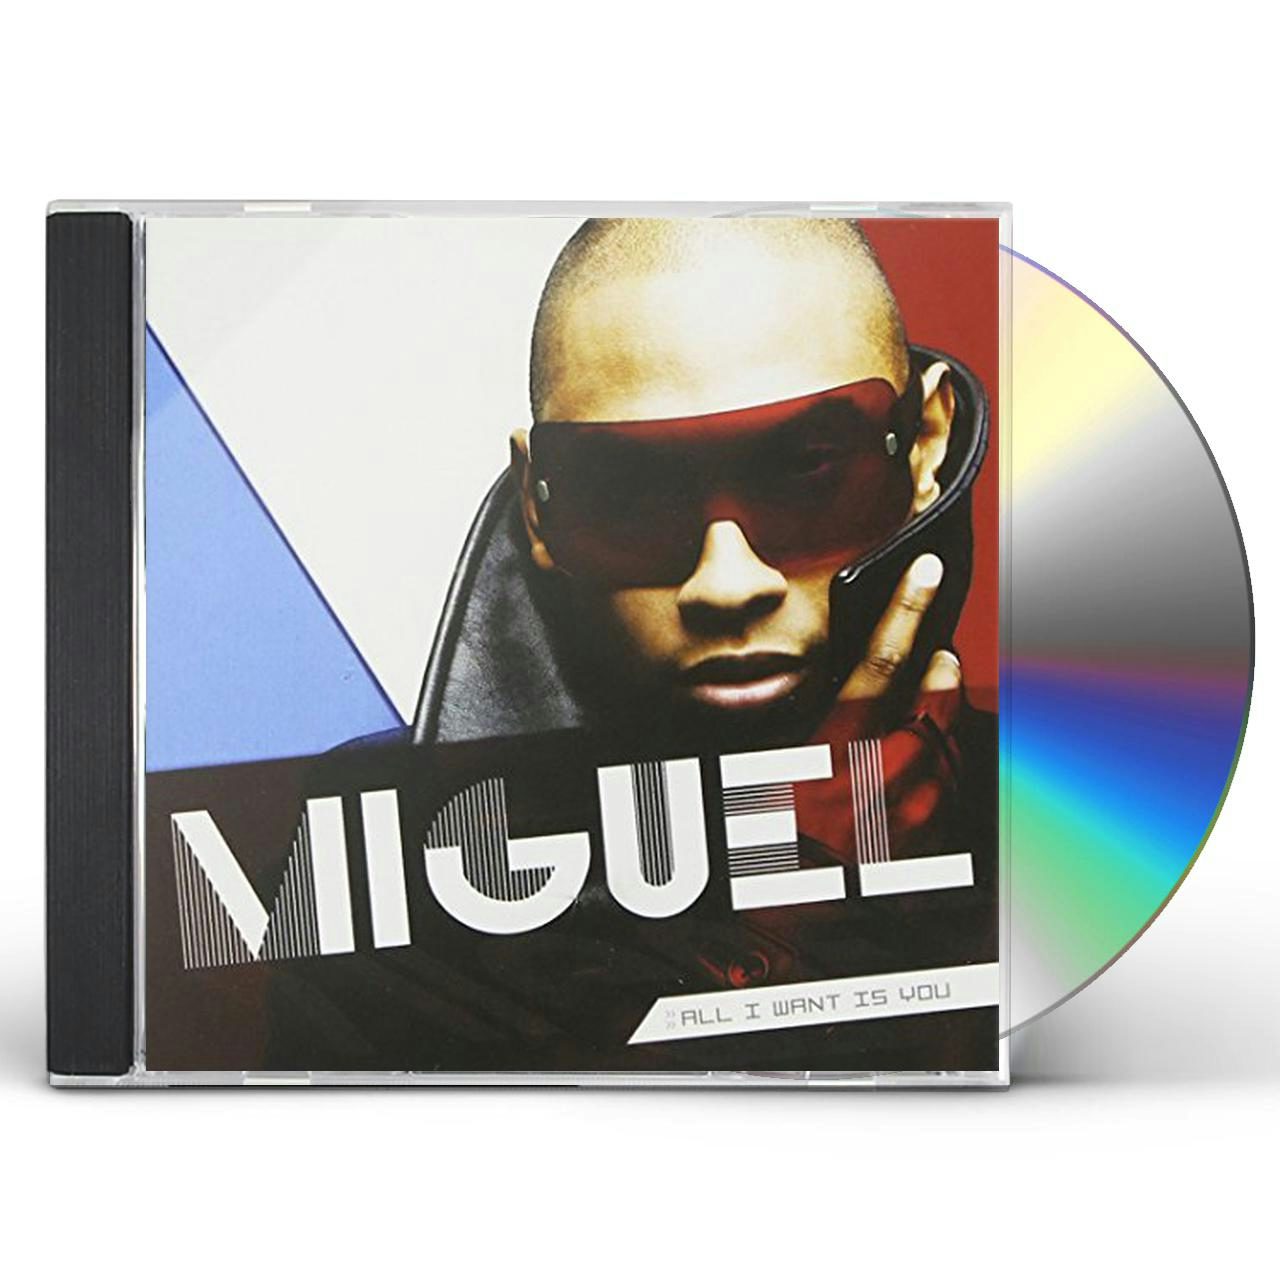 all i want is you miguel album download zip